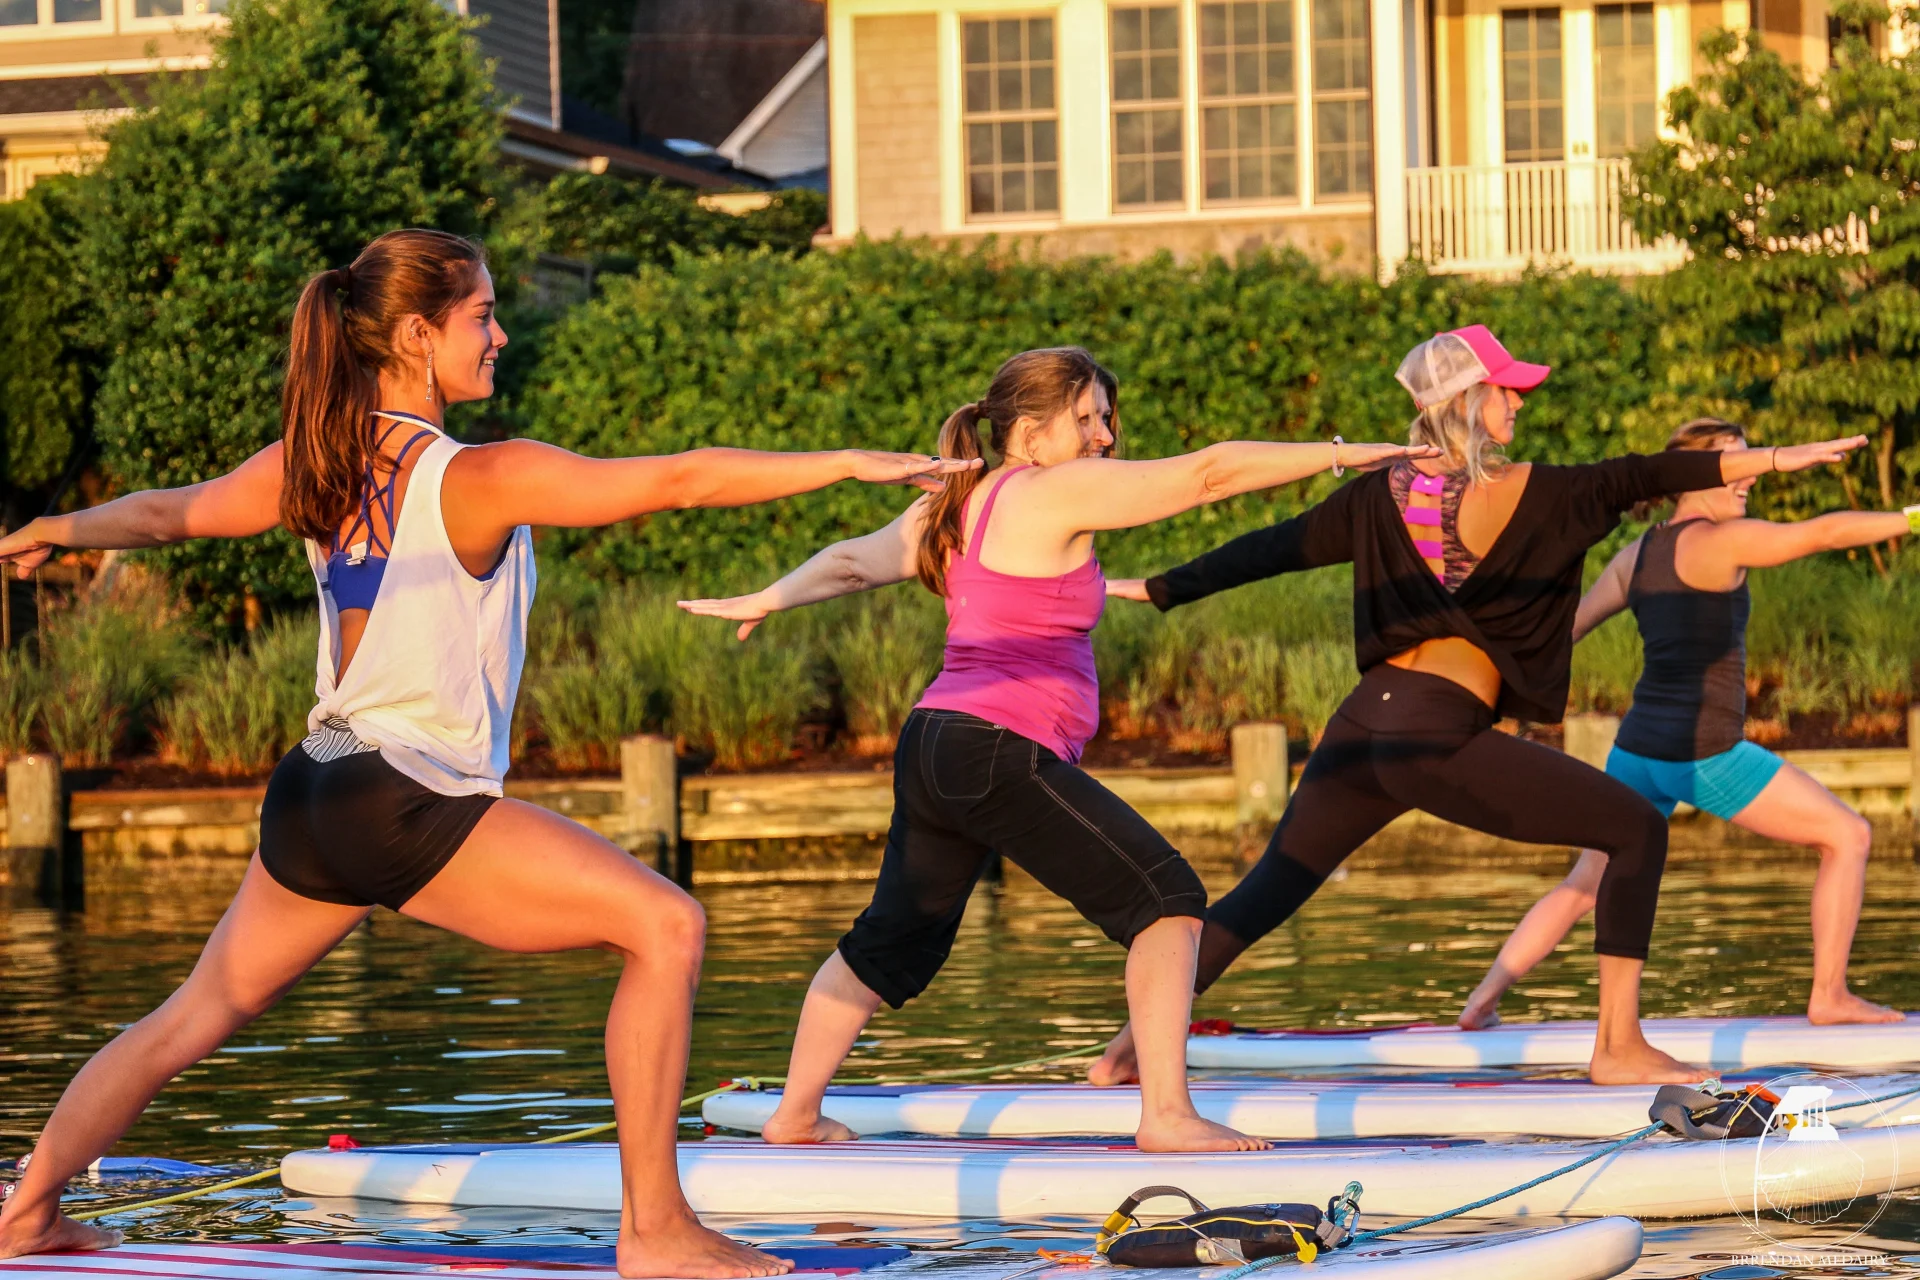 three women doing a warrior pose on paddleboards